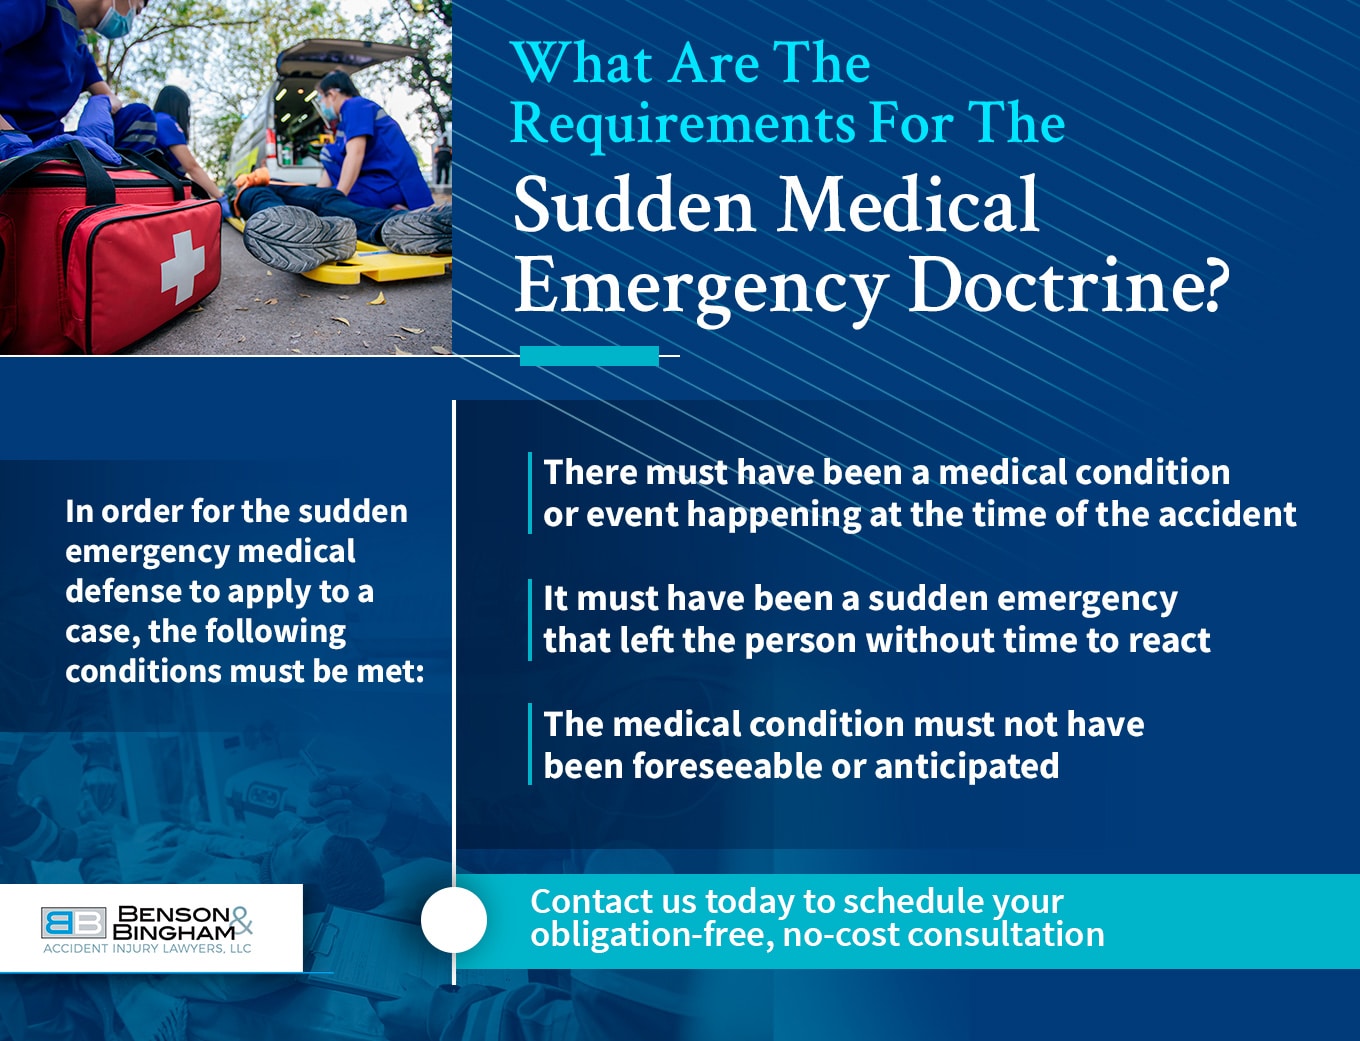 Infographic that shows the requirements for the sudden medical emergency doctrine